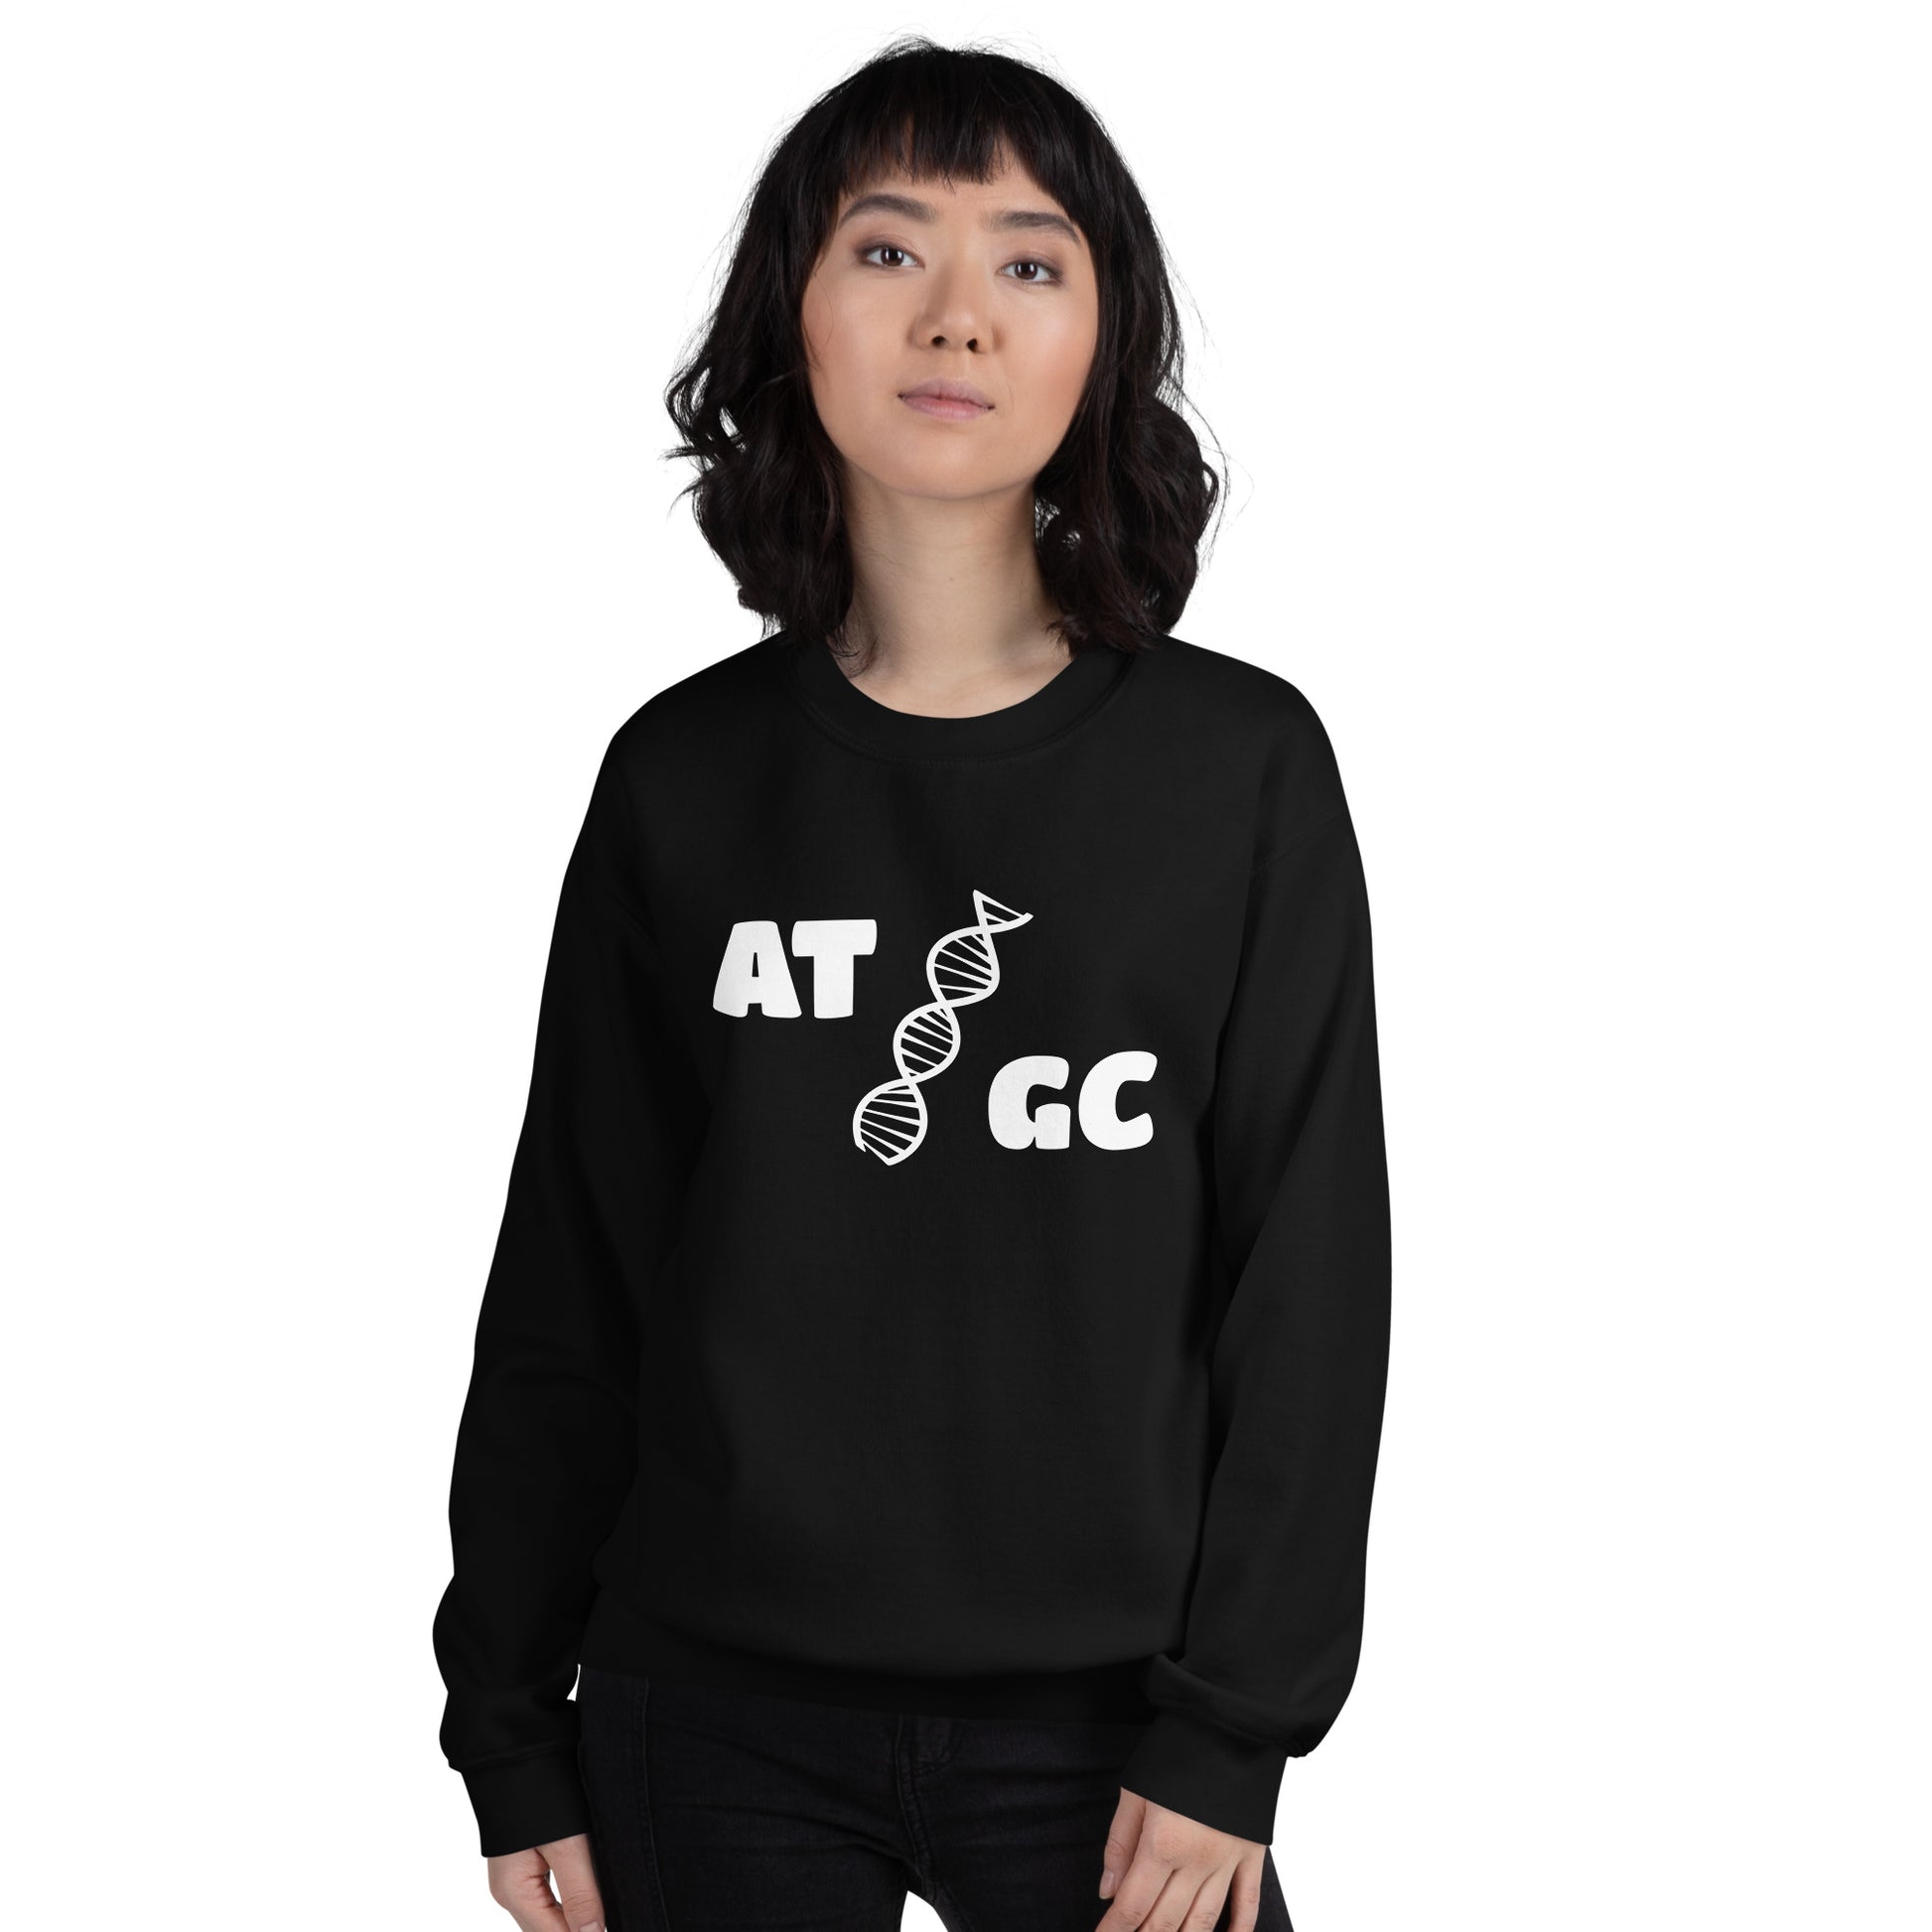 Women with black sweatshirt with image of a DNA string and the text "ATGC"